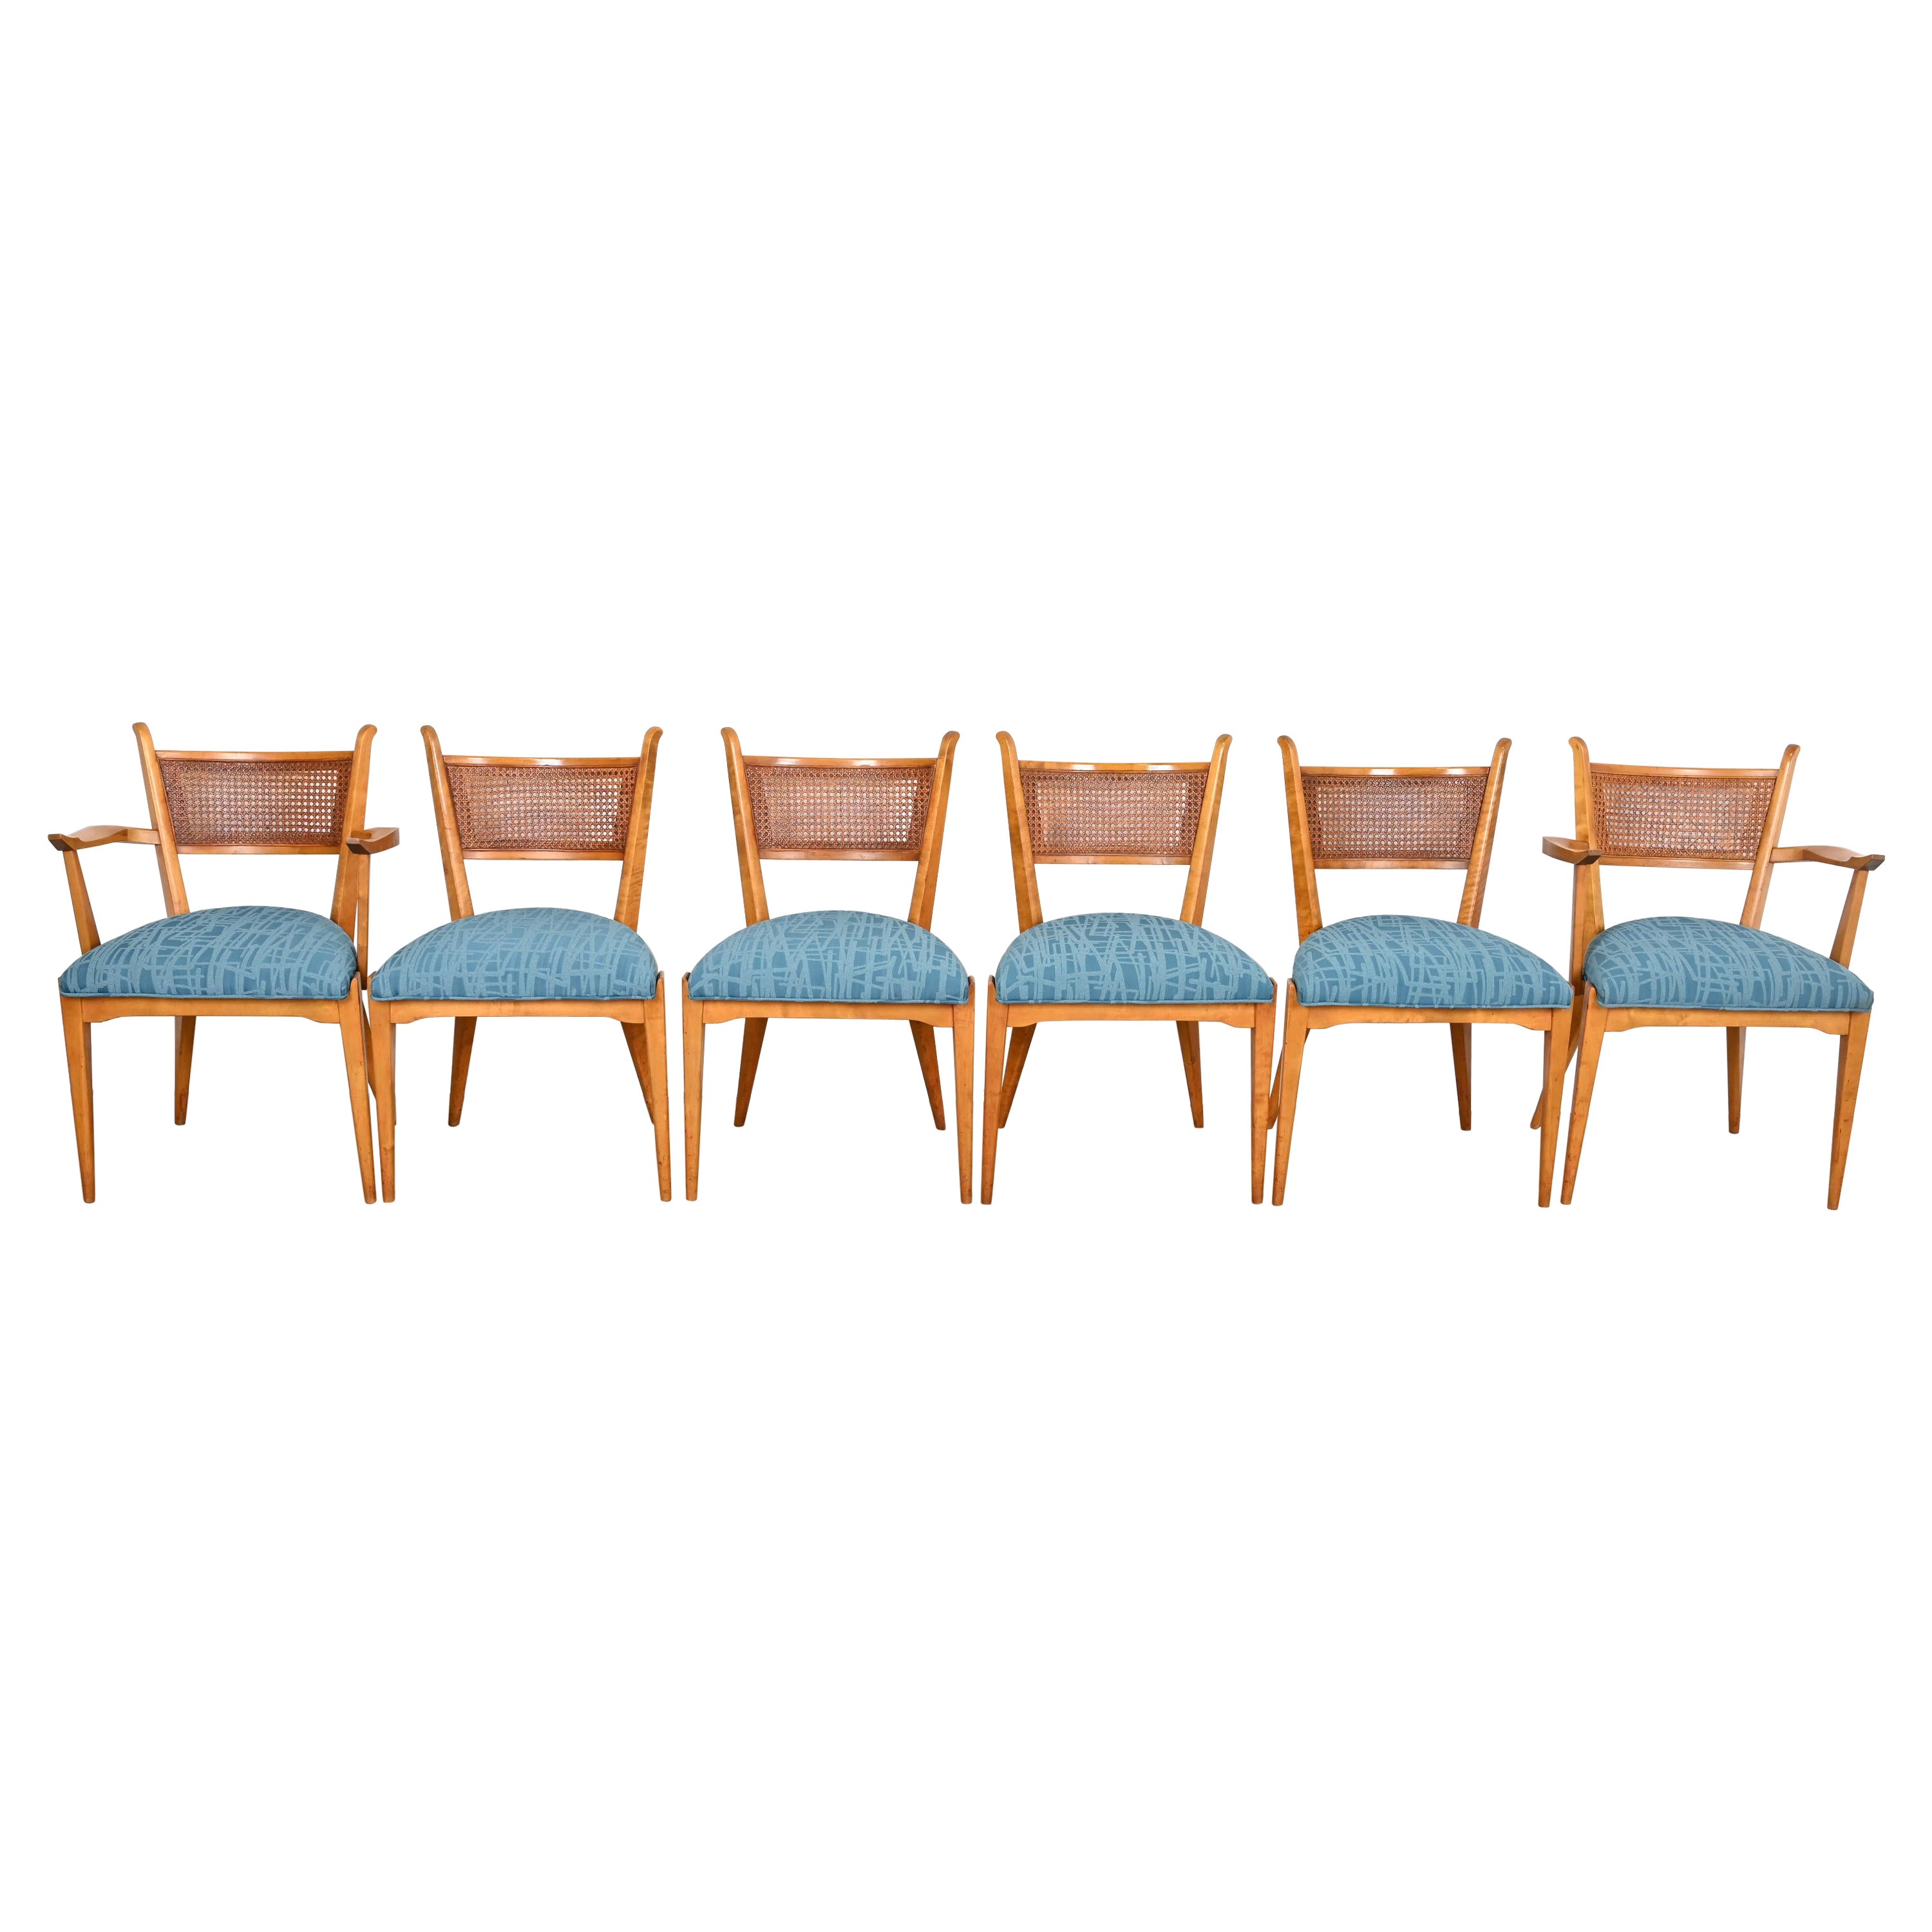 Edmond Spence Swedish Modern Maple and Cane Dining Chairs, Newly Reupholstered